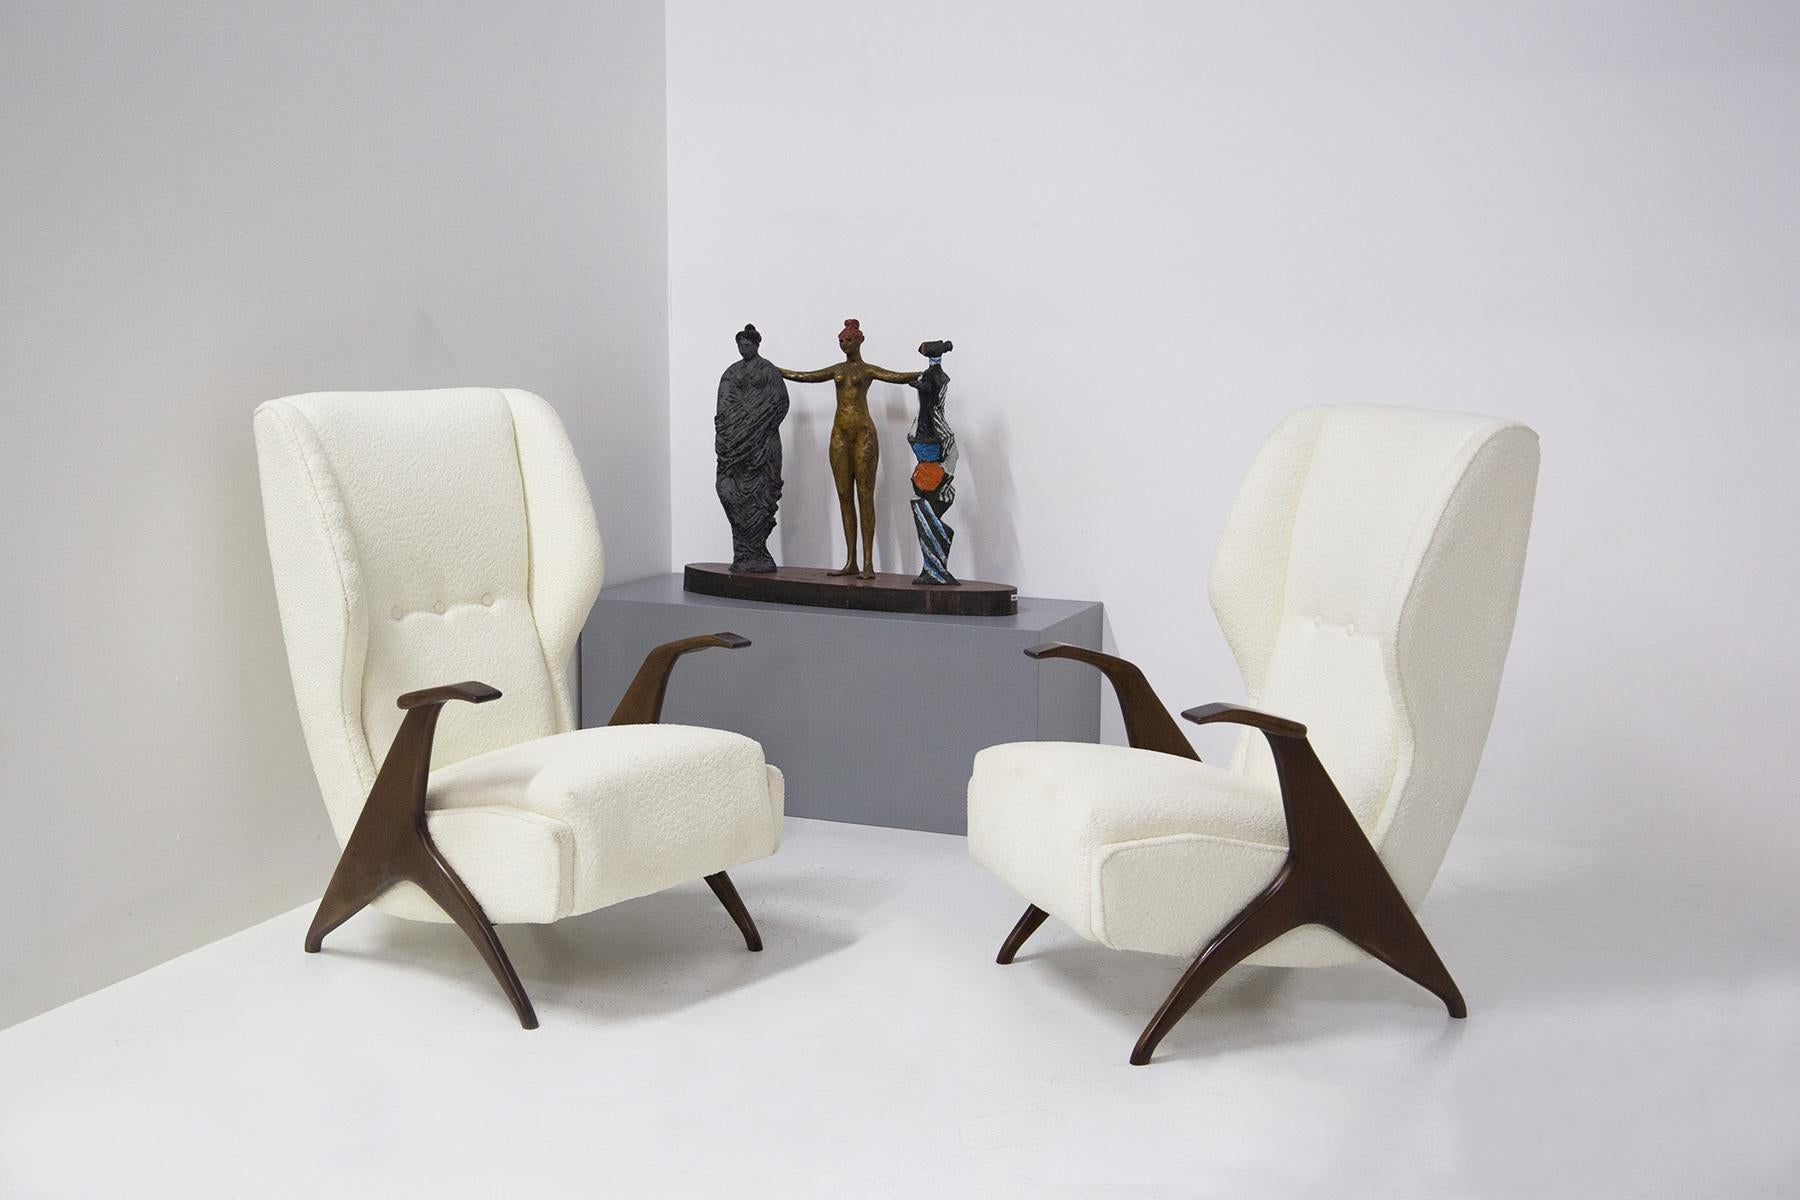 Elegant and comfortable pair of restored 1950's Italian armchairs. The pair of armchairs are upholstered in an elegant white bouclé fabric. While the frame, hand rests and feet are made of wood. The particularity of the armchairs are its two large